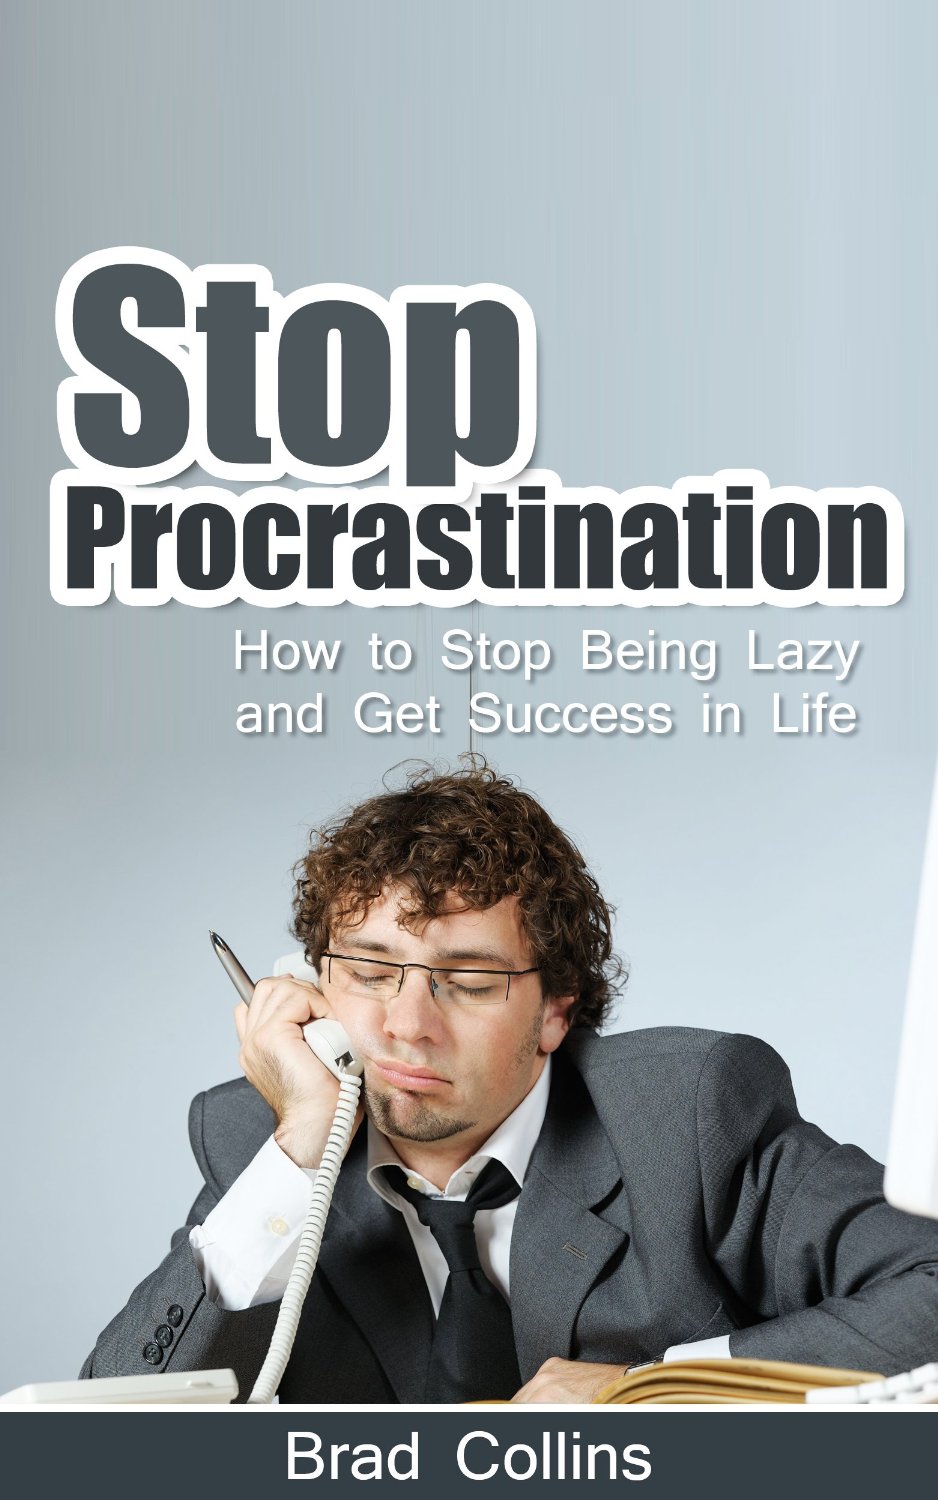 Stop Procrastination – How to Stop Being Lazy and Get Success in Life